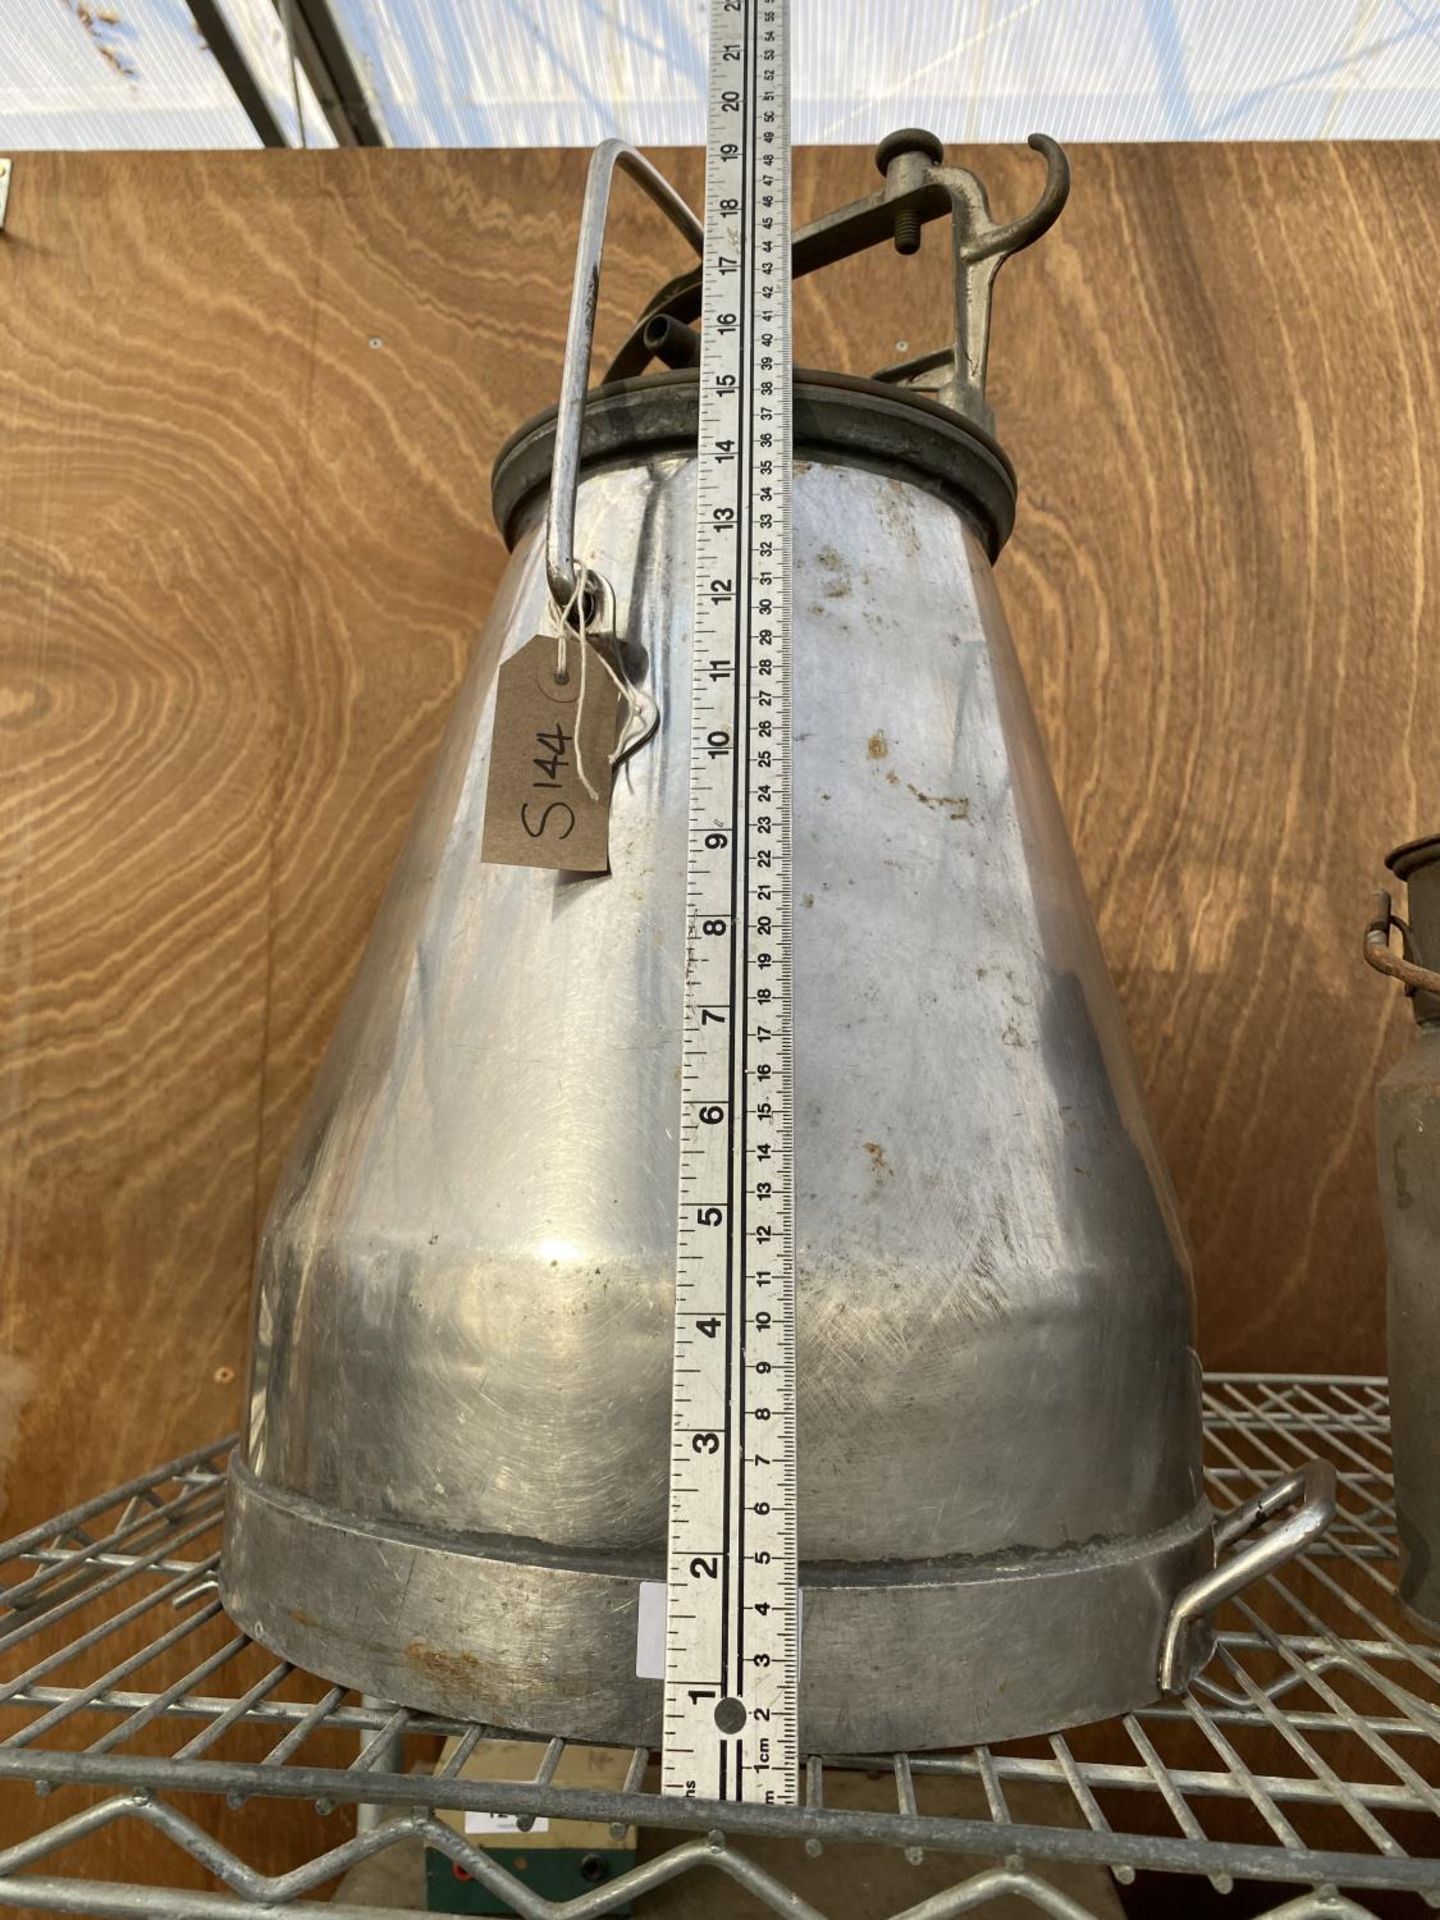 A VINTAGE STAINLESS STEEL MILKING BUCKET WITH LID - Image 3 of 3